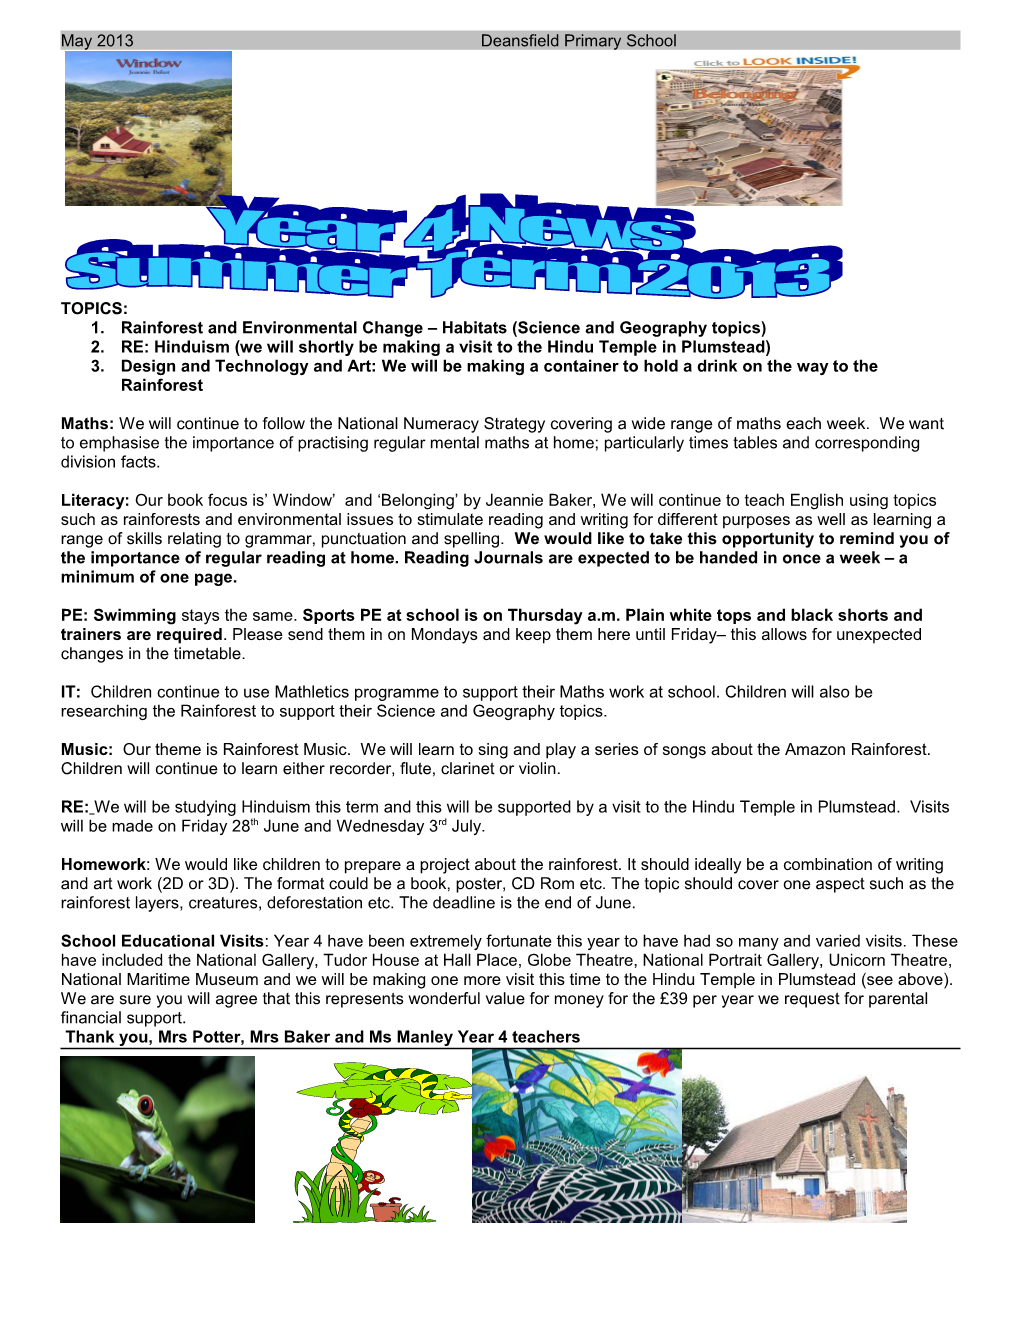 Rainforest and Environmental Change Habitats (Science and Geography Topics)